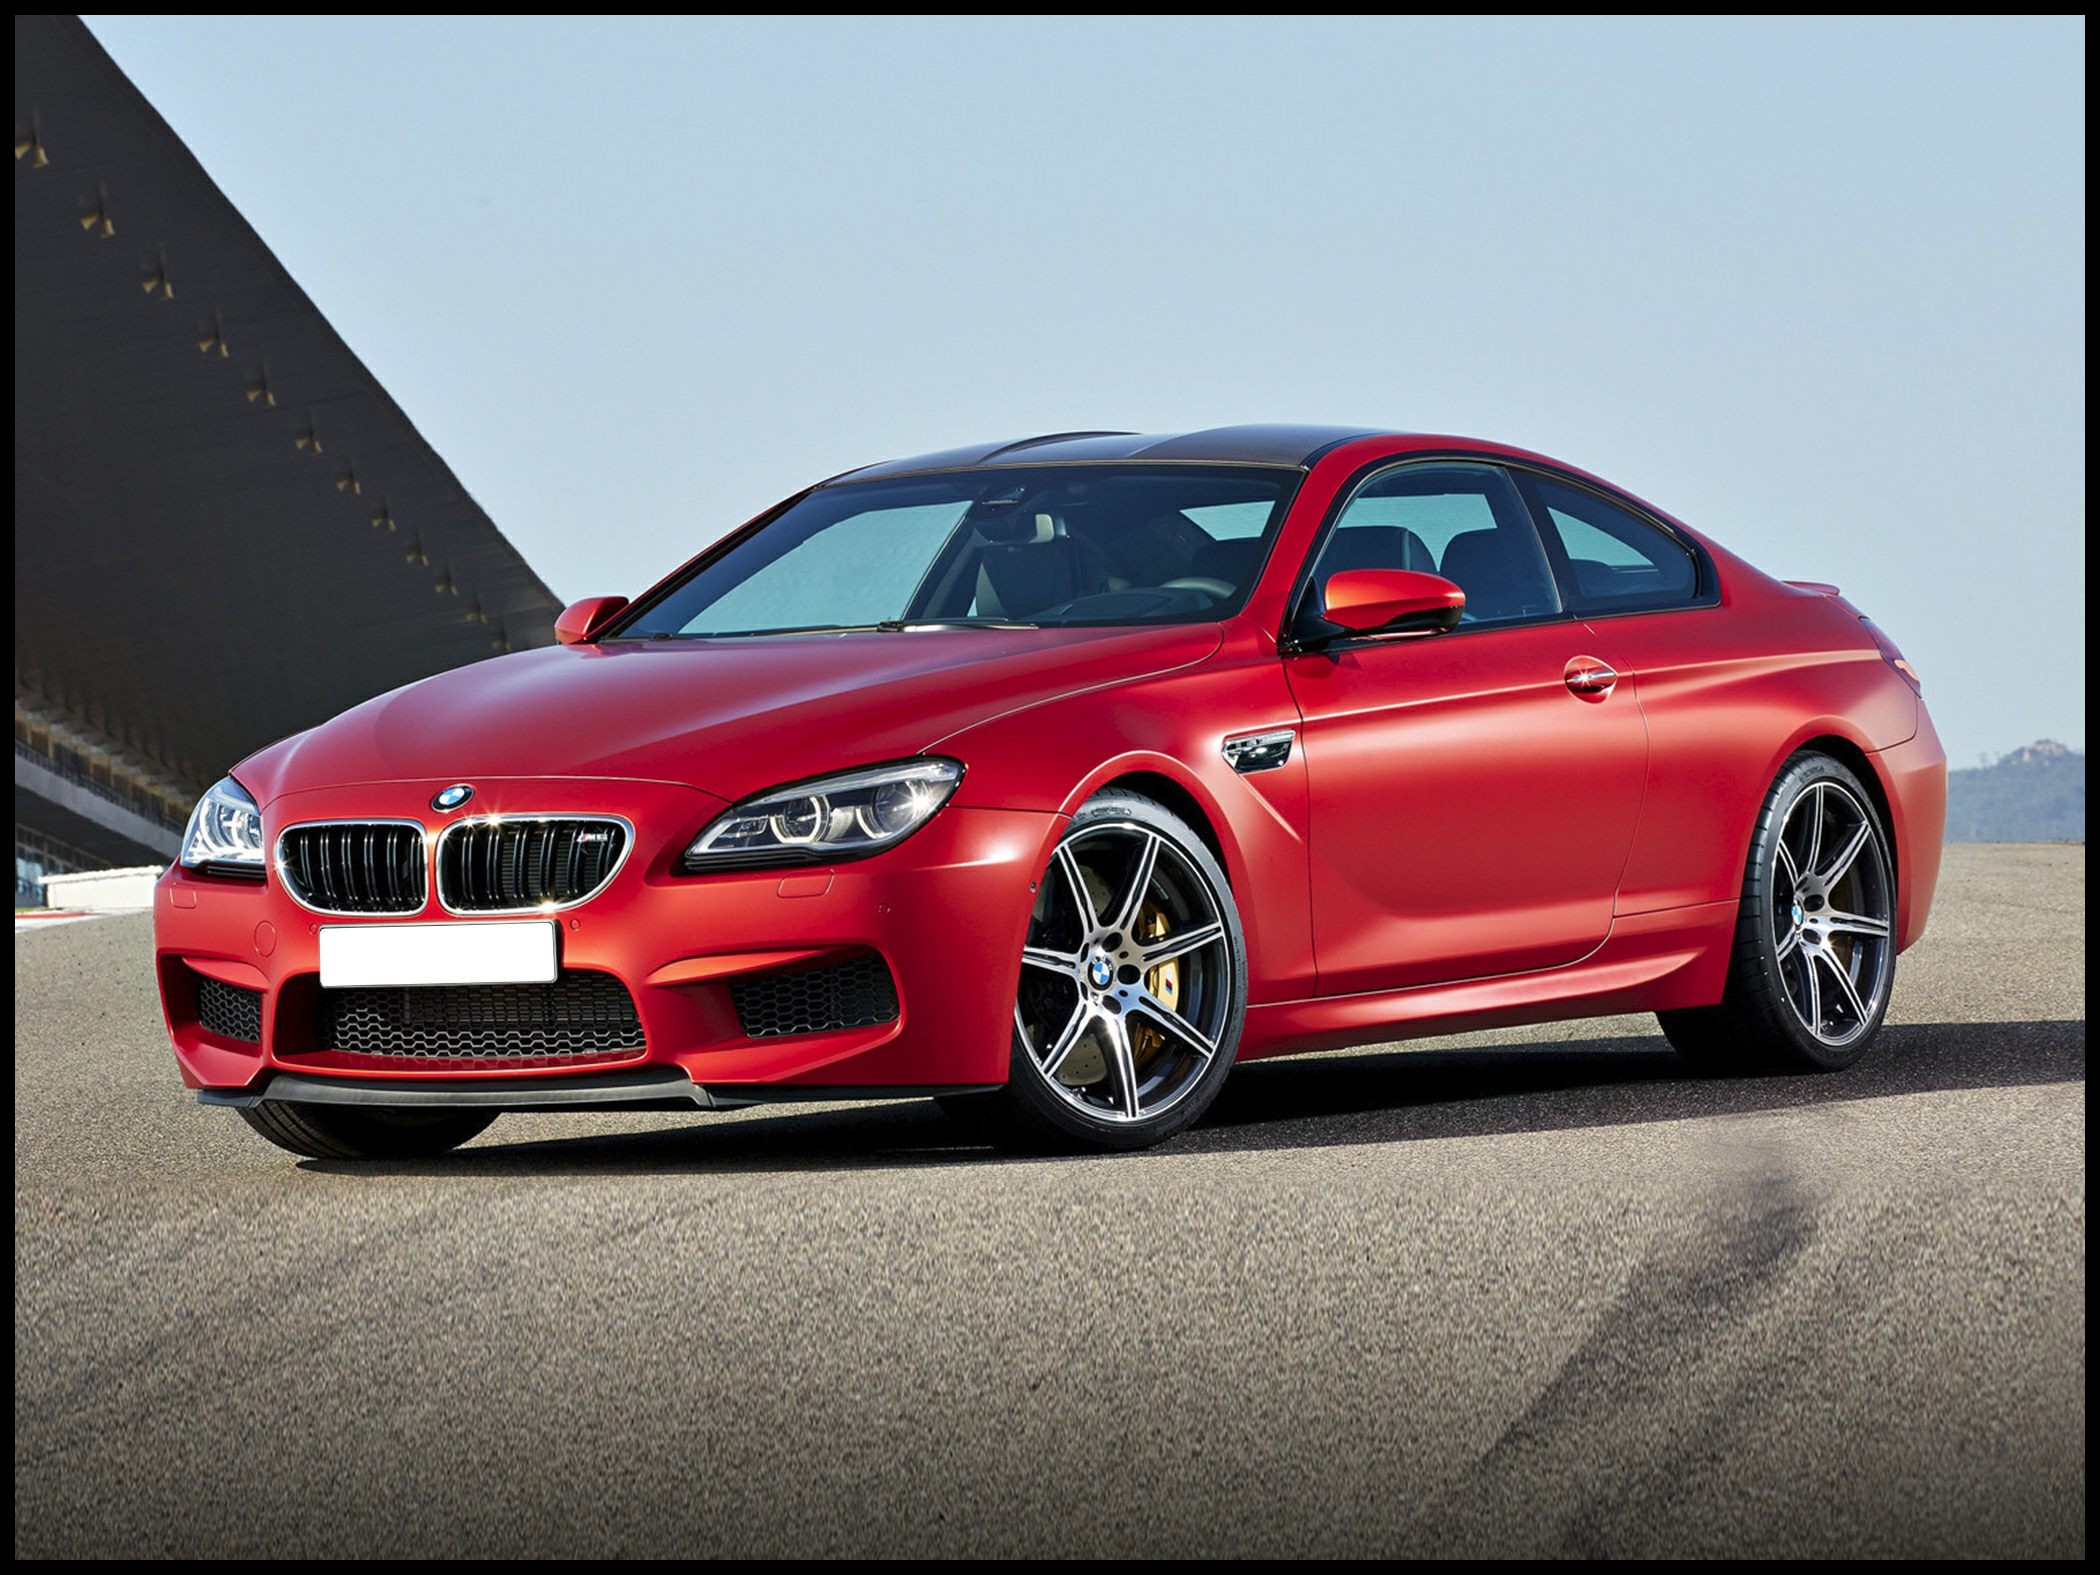 2017 Bmw M6 0 60 New 2017 Bmw M6 Price S Reviews Safety Ratings & Features